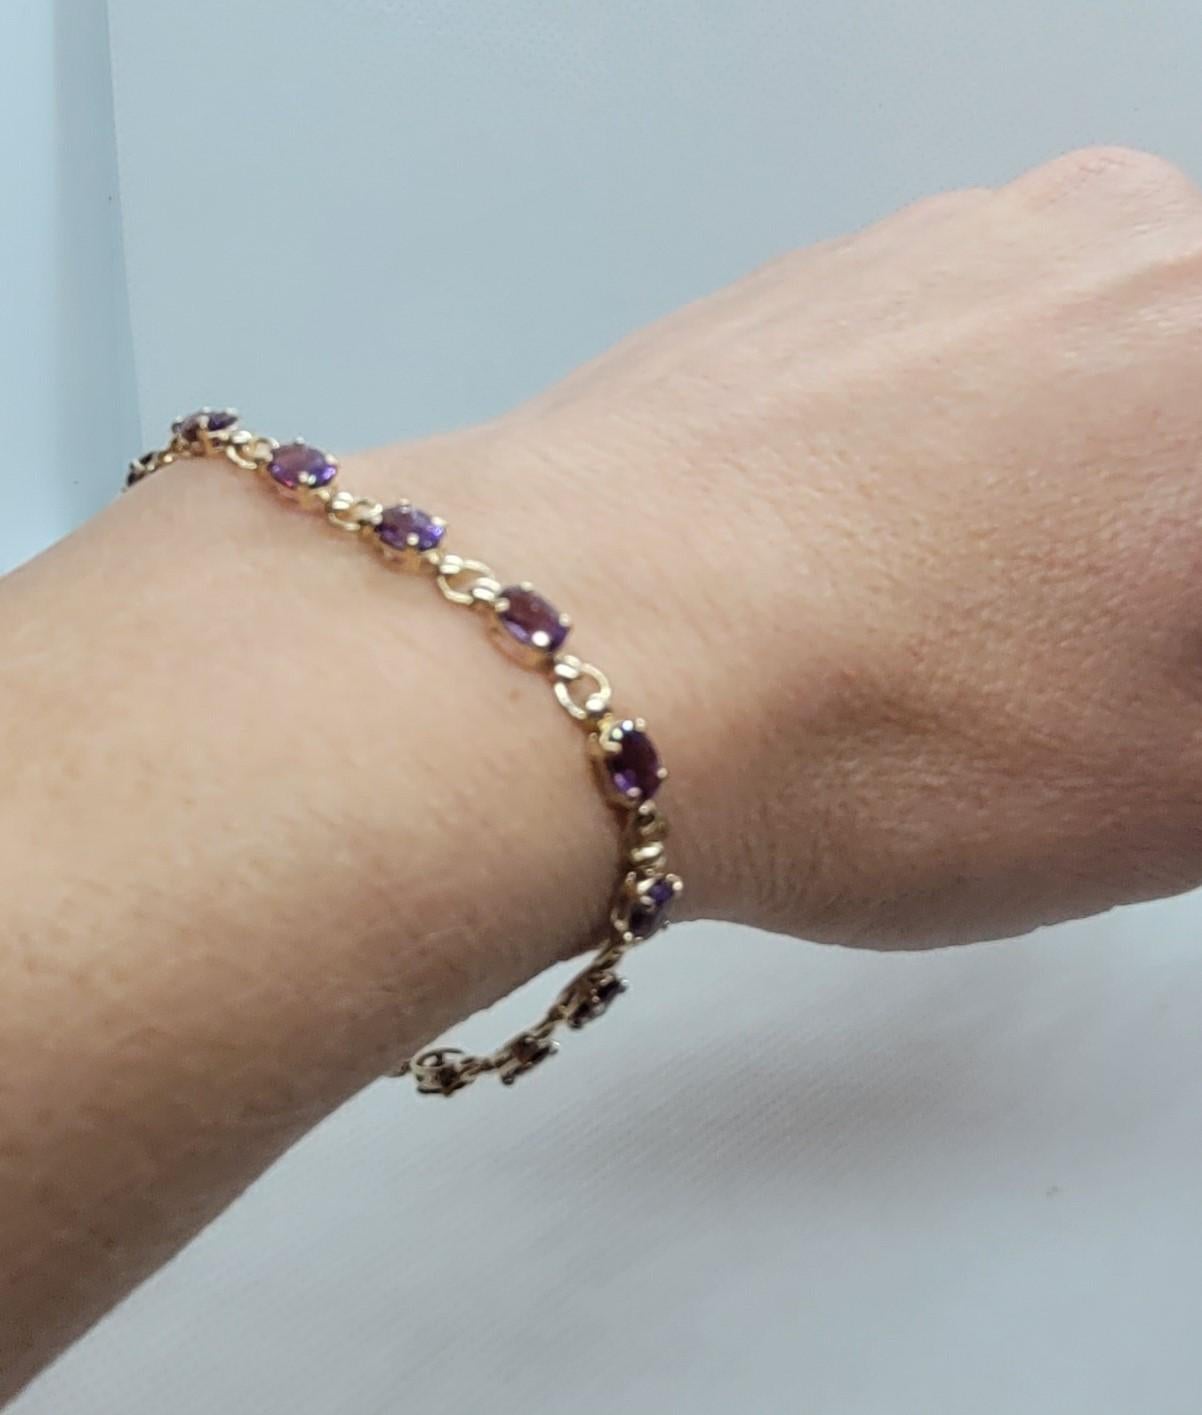 This is a beautiful yellow-gold amethyst bracelet, measuring 7.25 inches in length. The bracelet features 14 oval amethyst stones, each measuring 6 x 4 mm, secured with four prongs. The bracelet is made of 10kt gold and weighs 5 grams. It is 4mm